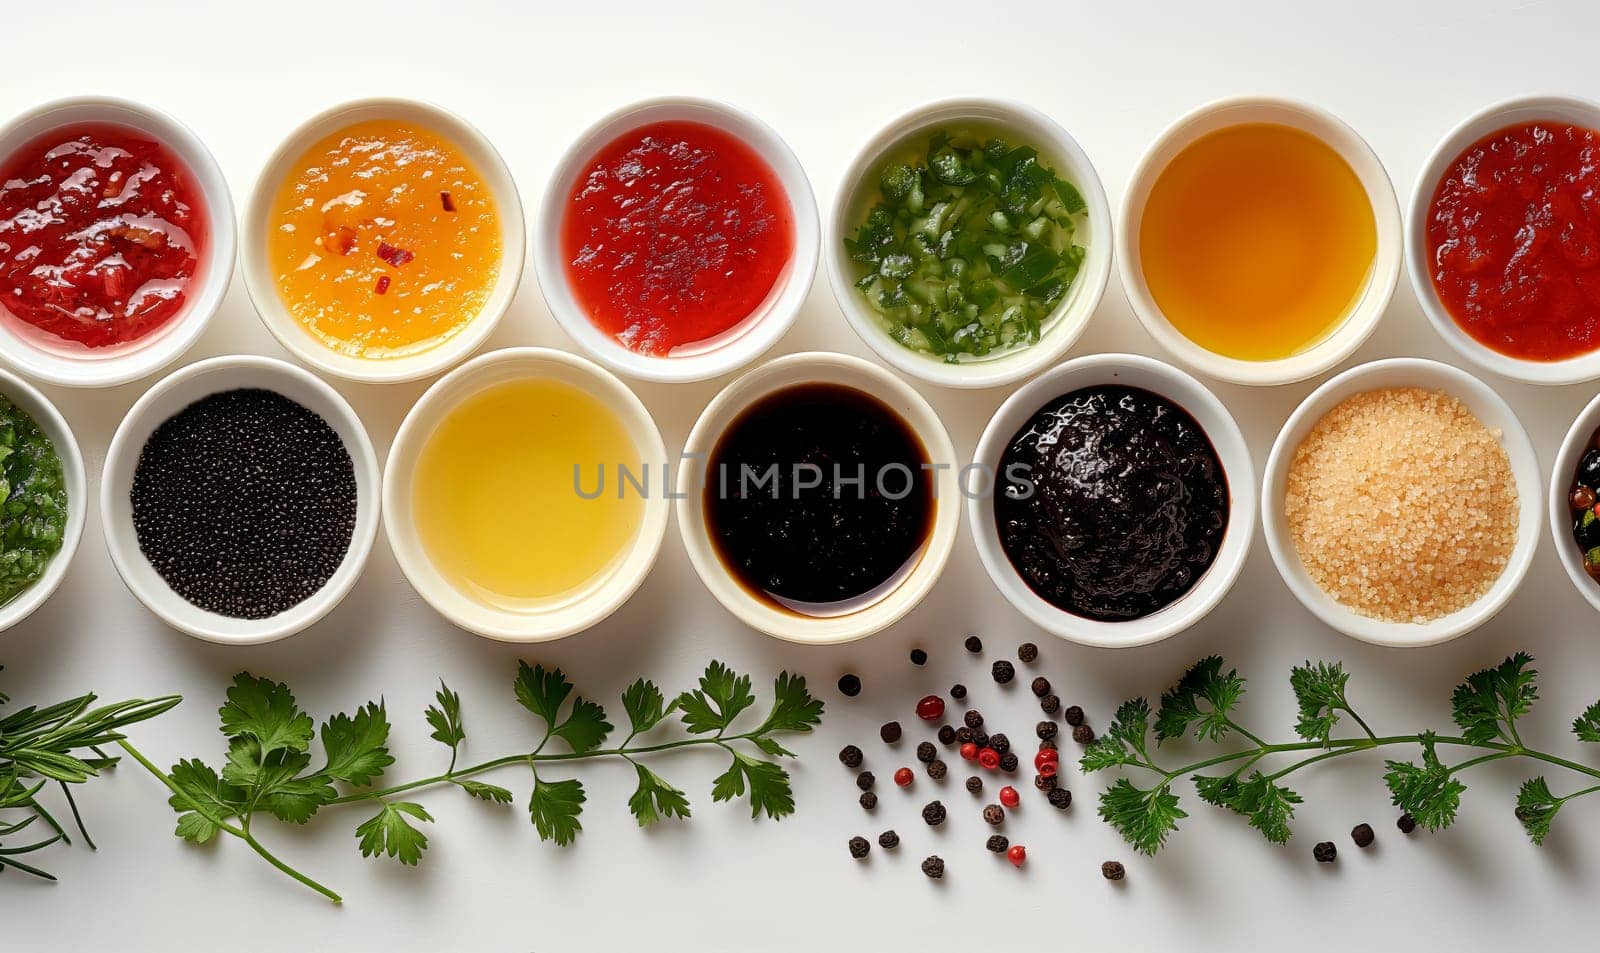 Variety of Sauces and Spices on White Background by Fischeron